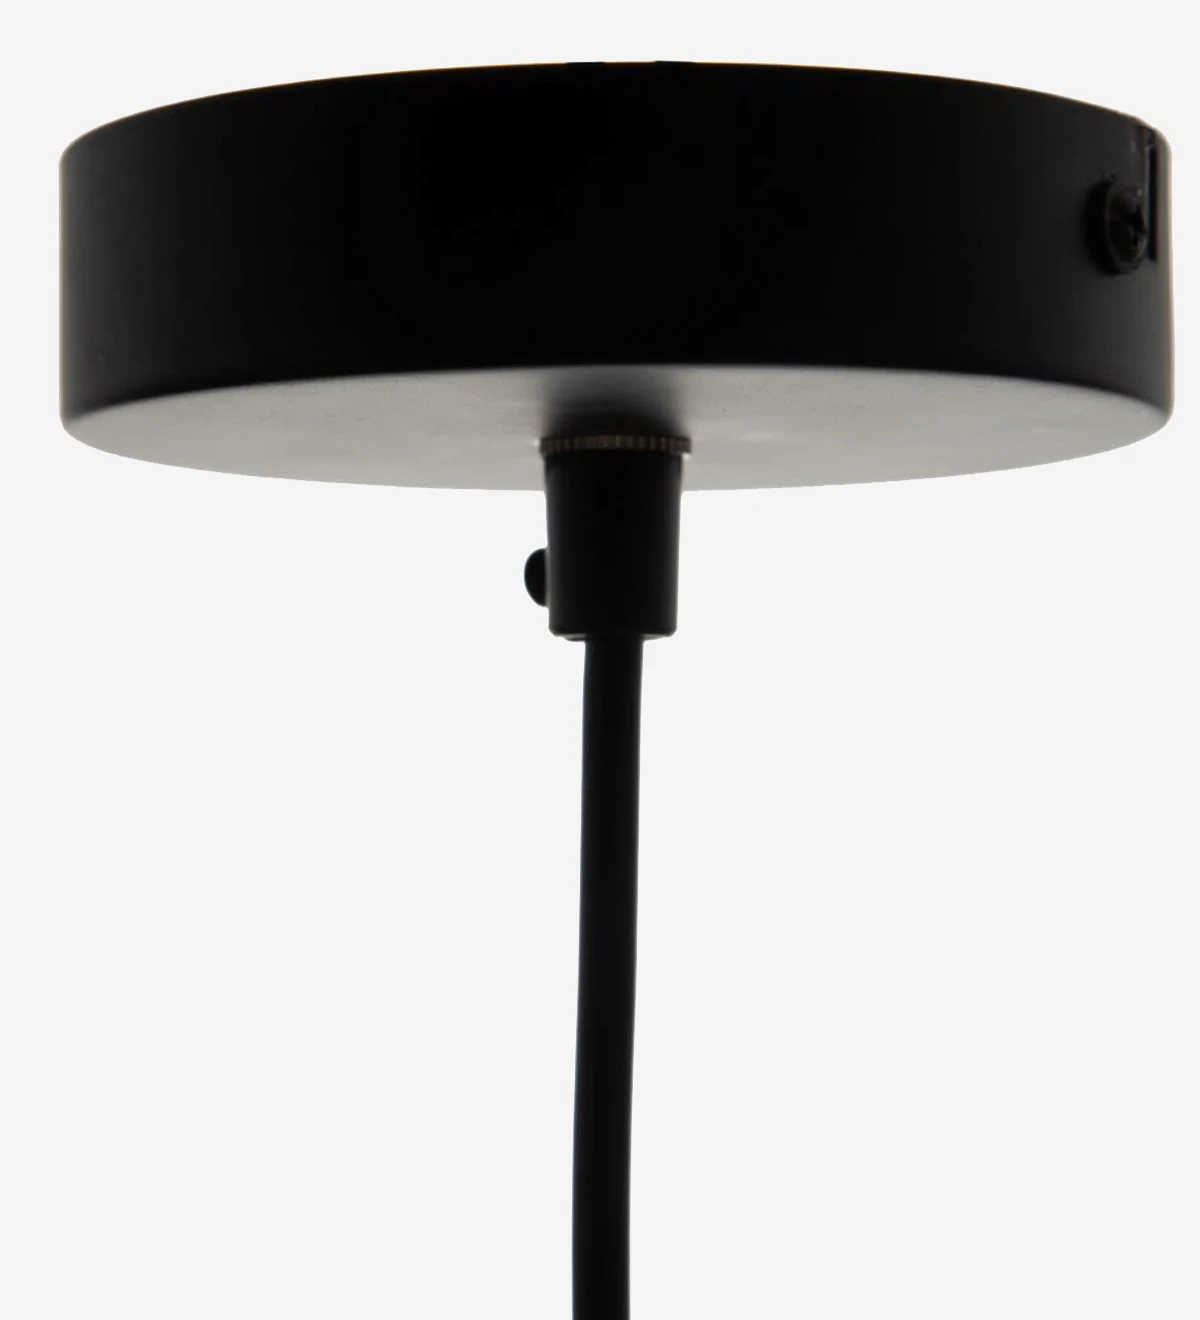  Suspension lamp in black metal with clear glass shade.